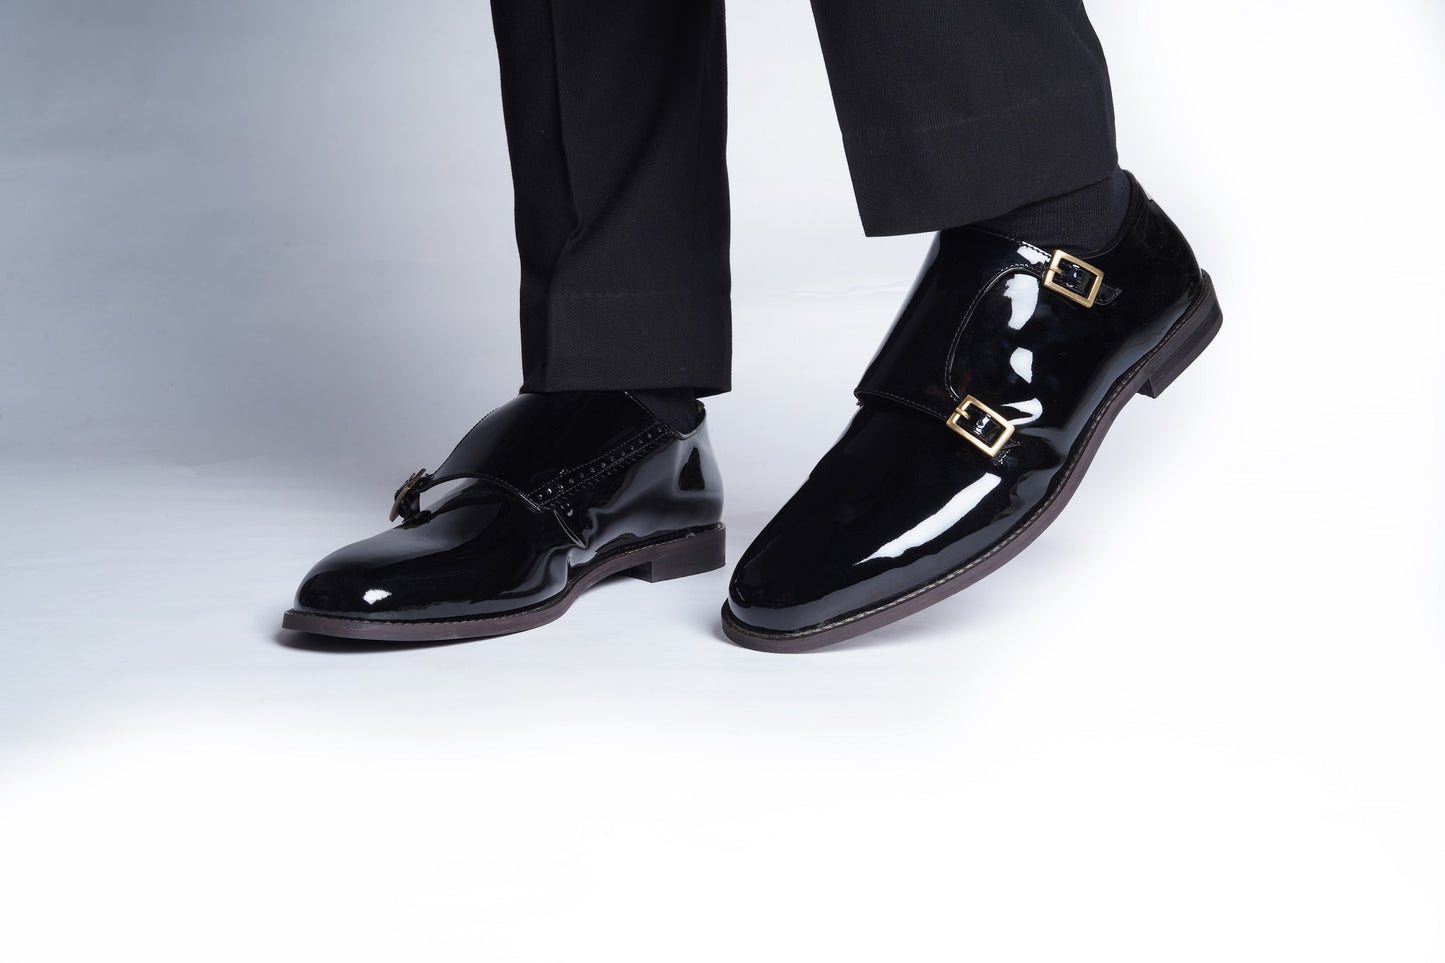 PATENT LEATHER MONK STRAPS